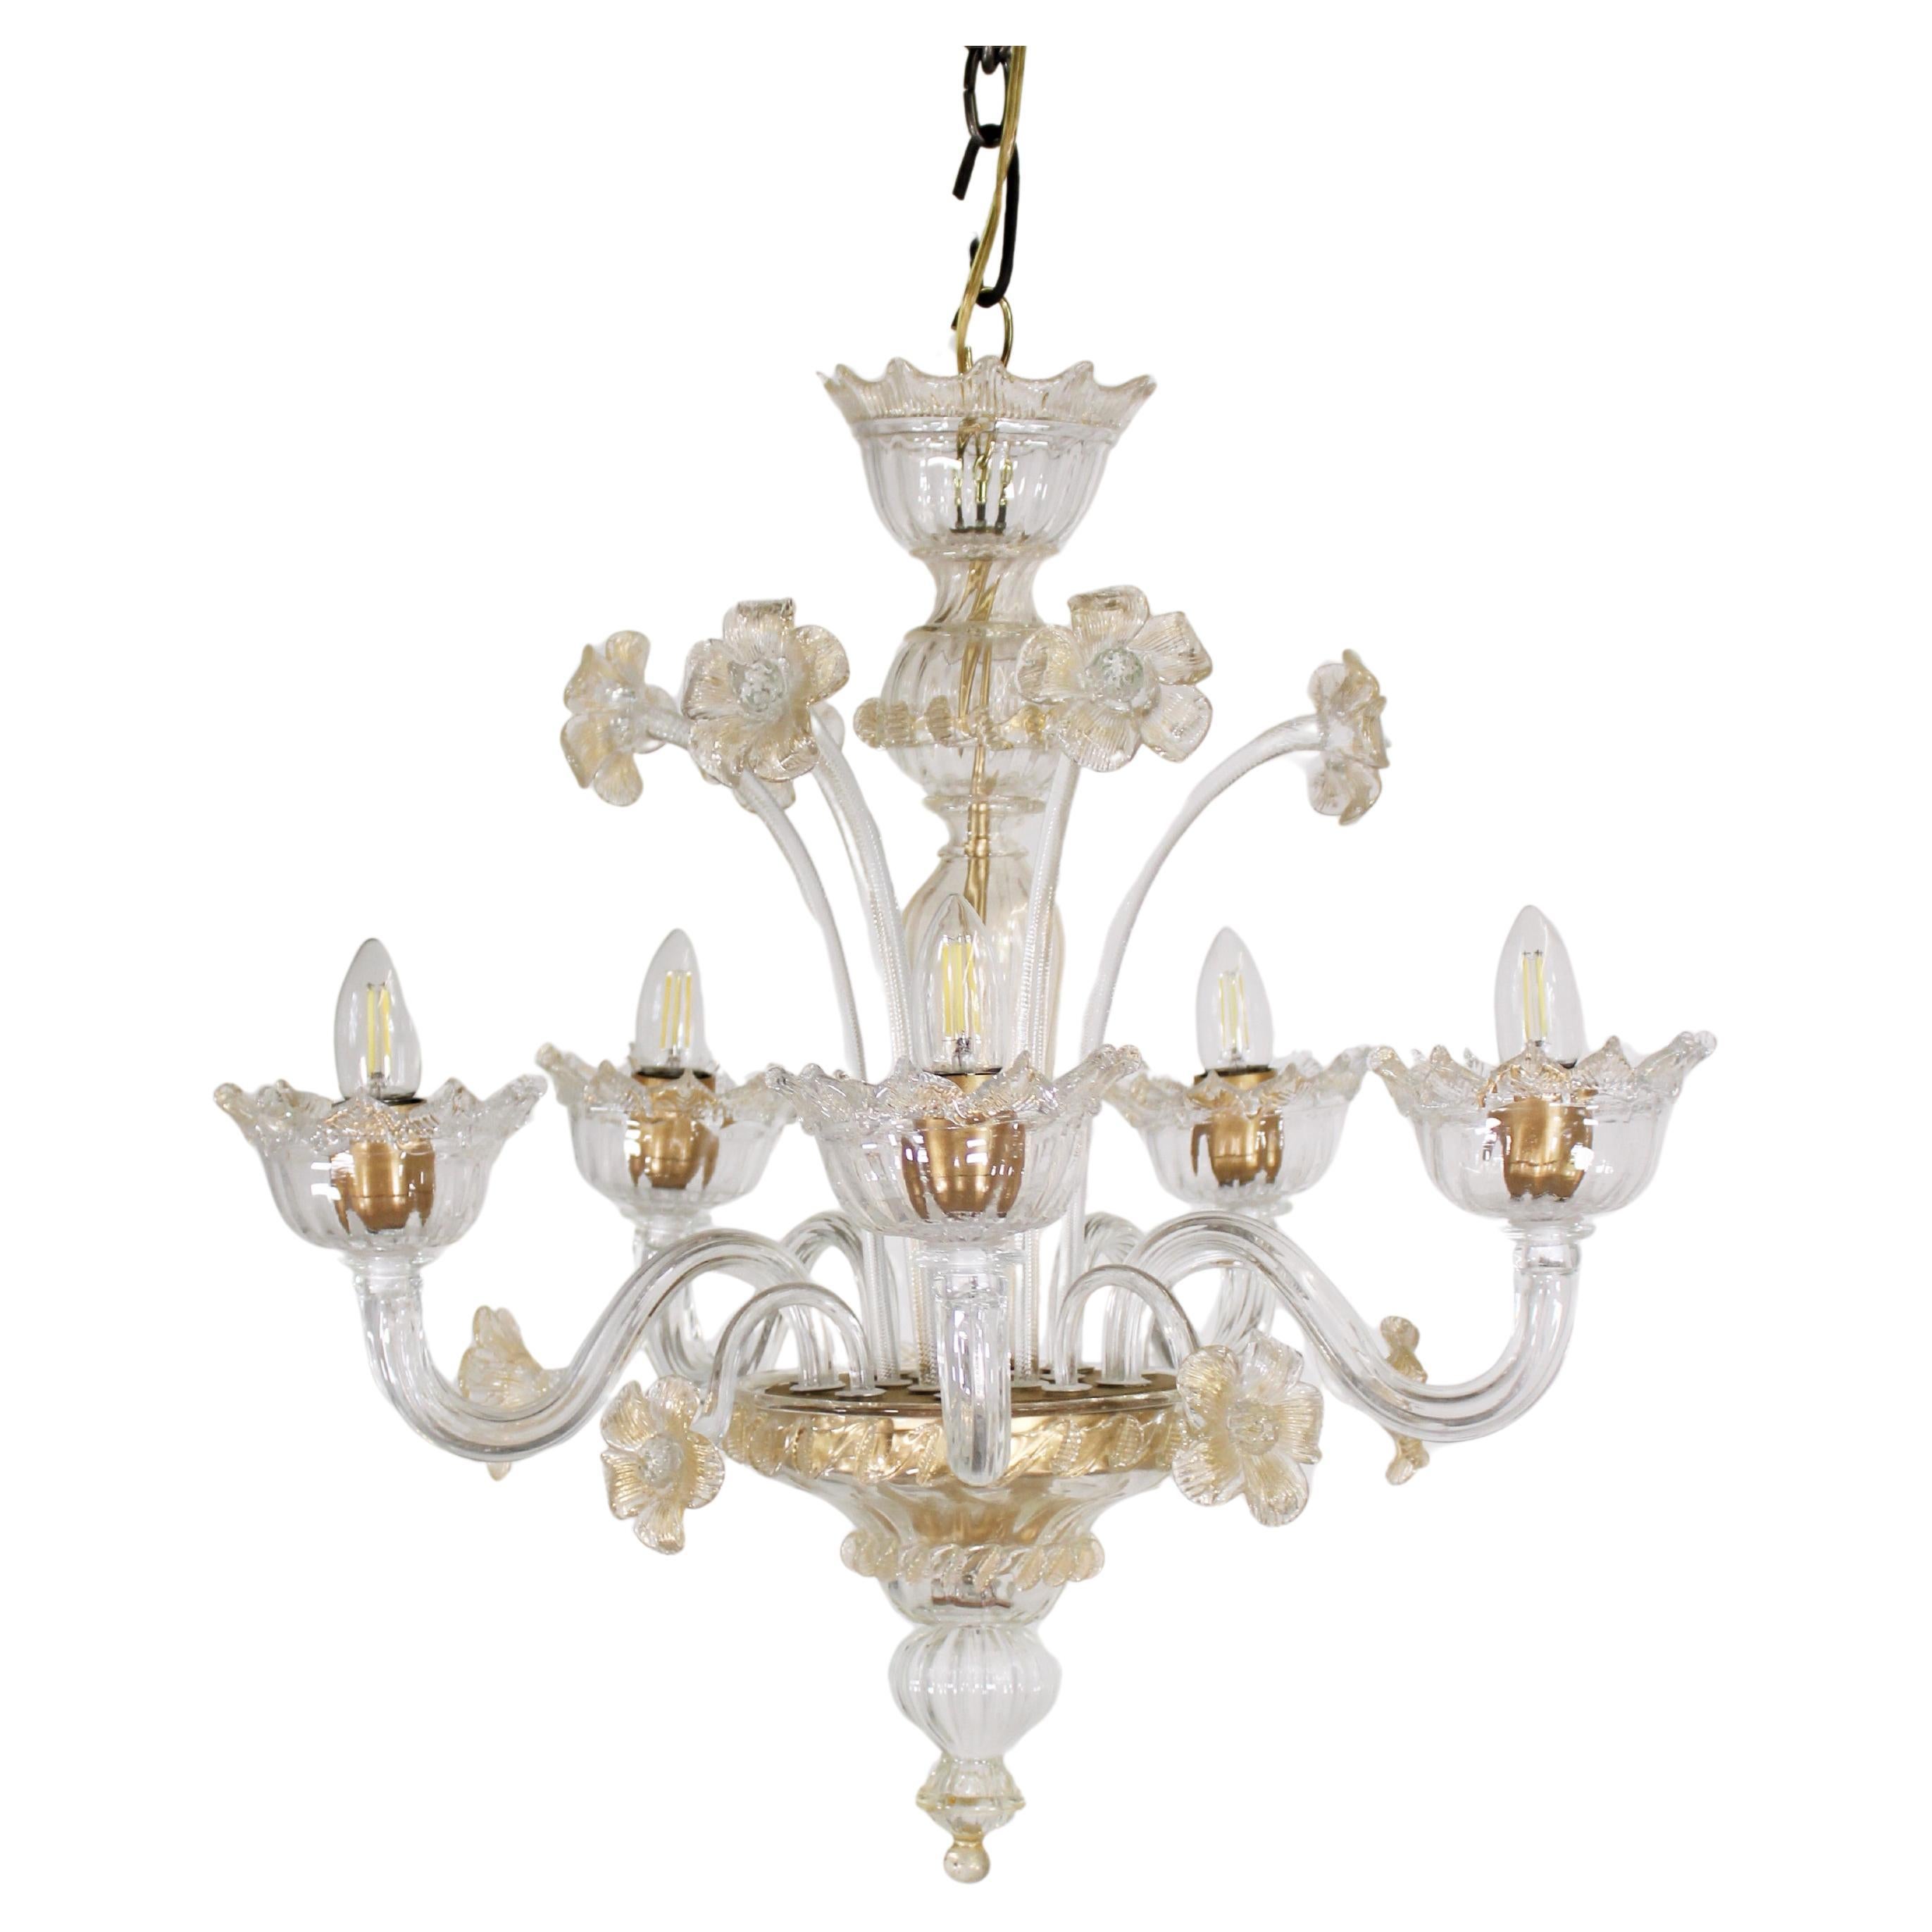 Vintage Baroque Style Five Arm Gold Infused Cristallo Murano Glass Chandelier For Sale